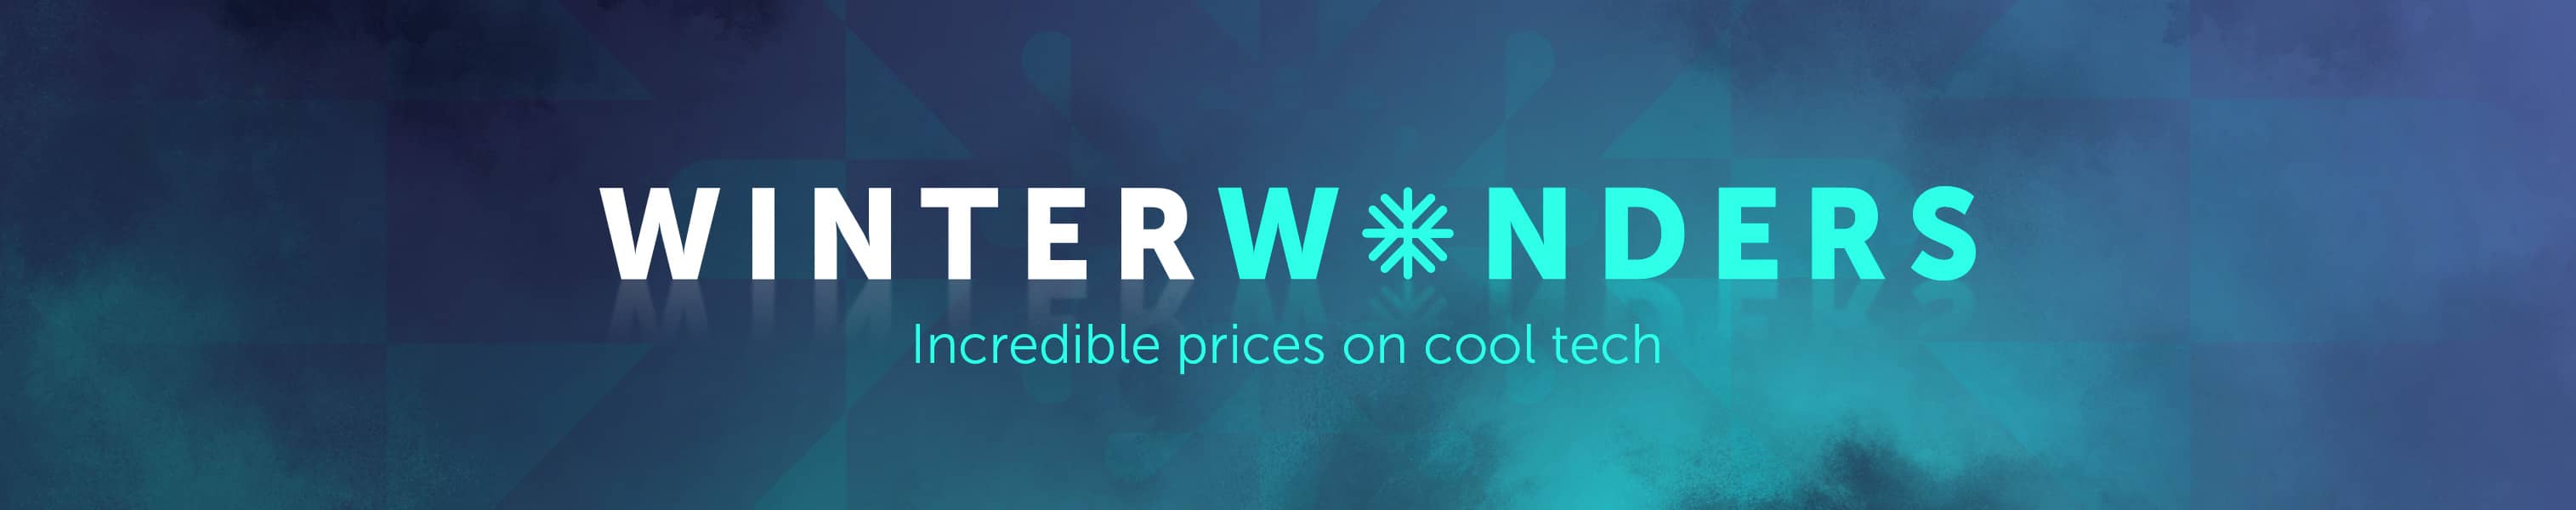 Winter Wonders - Incredible prices on cool tech